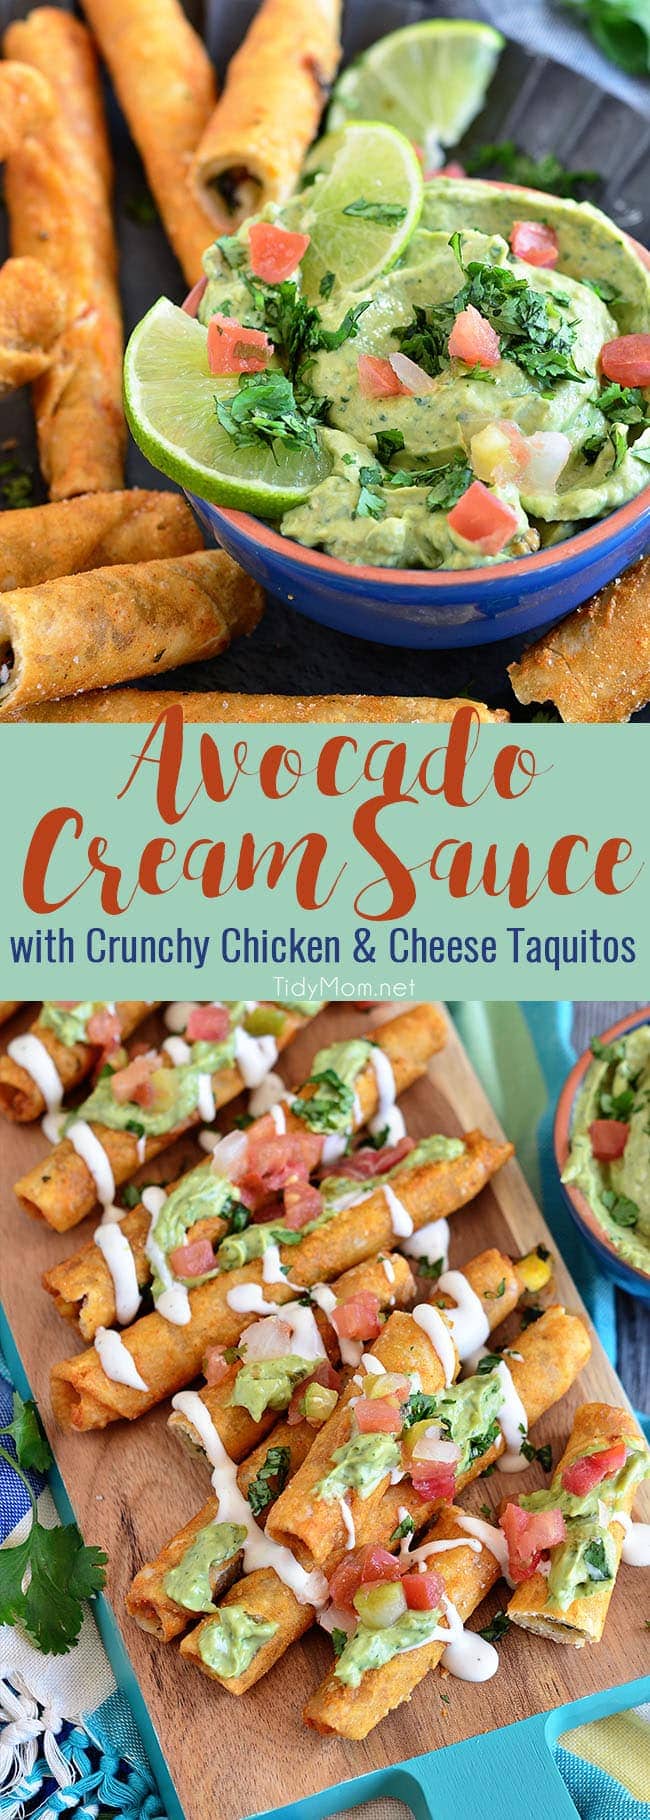 Creamy avocados, a little sour cream, and a whole lot of cilantro create a dreamy AVOCADO CREAM SAUCE that pairs perfectly with Extra Crunchy Chicken and Cheese Taquitos, for an after-school snack, party appetizer or meal. Recipe at TidyMom.net